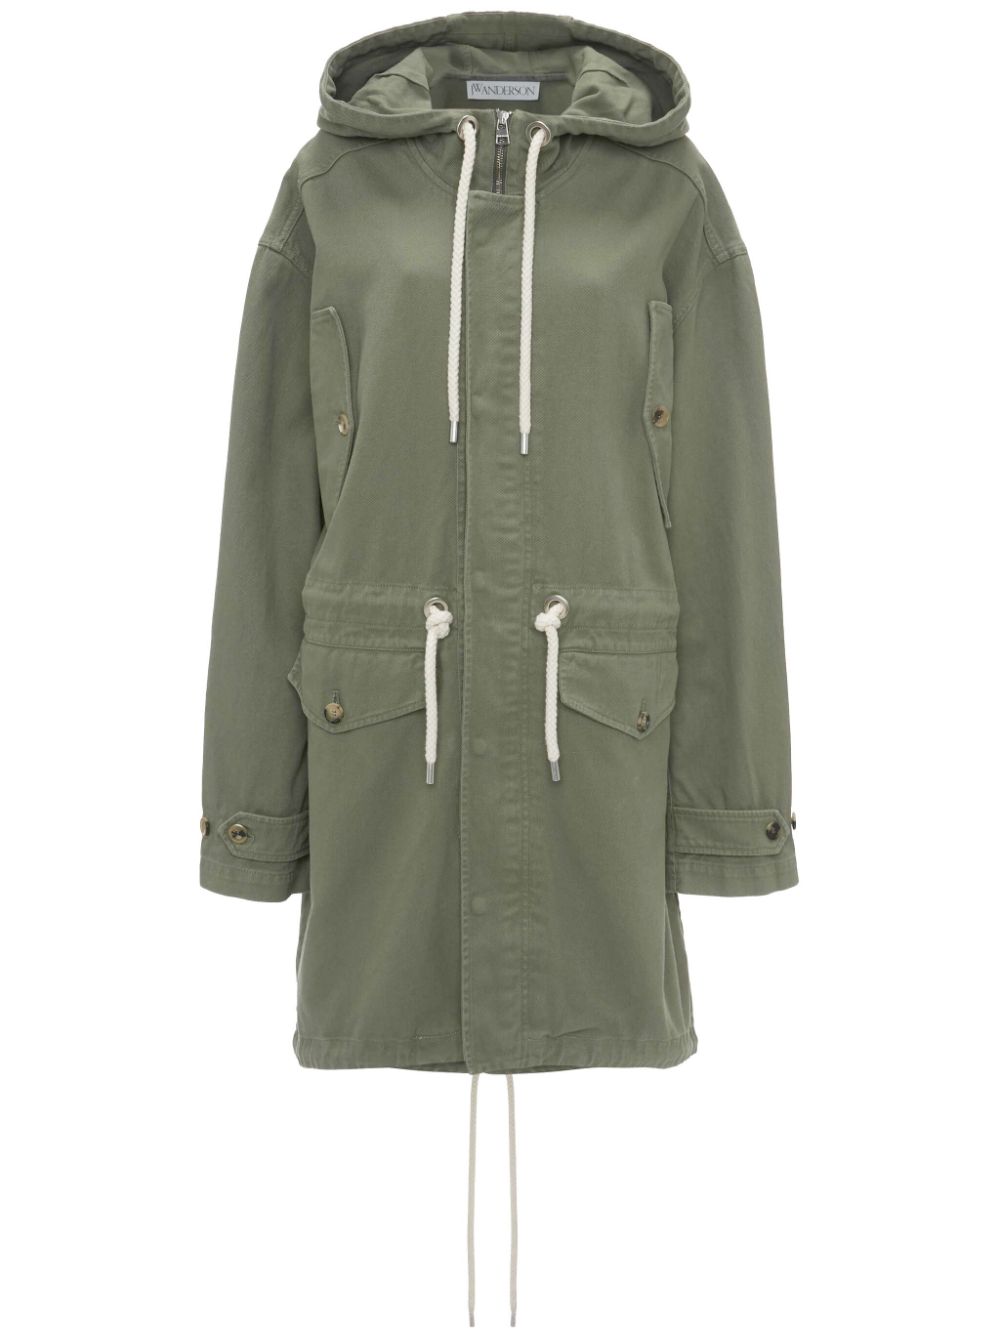 JW Anderson drawstring cotton hooded parka - Green